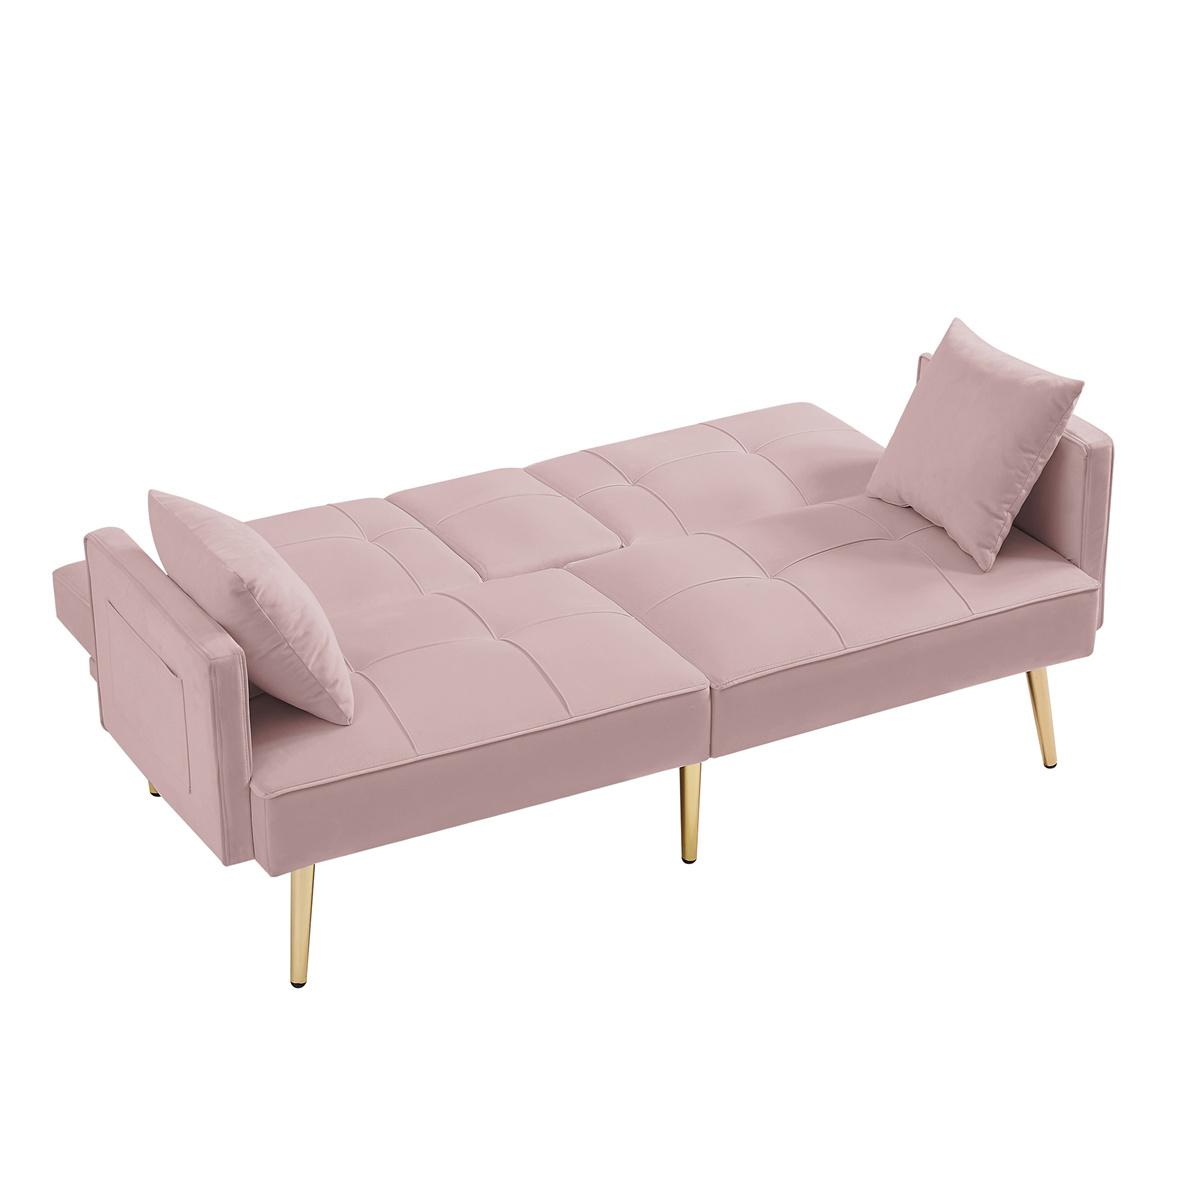 Dropship Velvet Shoe Changing Stool, Footstool, Square Cushion Foot Stool,  Sofa Stool, Rest Stool,Low Stool .Step Stool, Small Footrest .Suitable For  Clothes Shop,Living Room,Fitting Room.Pink BenchST-001 to Sell Online at a  Lower